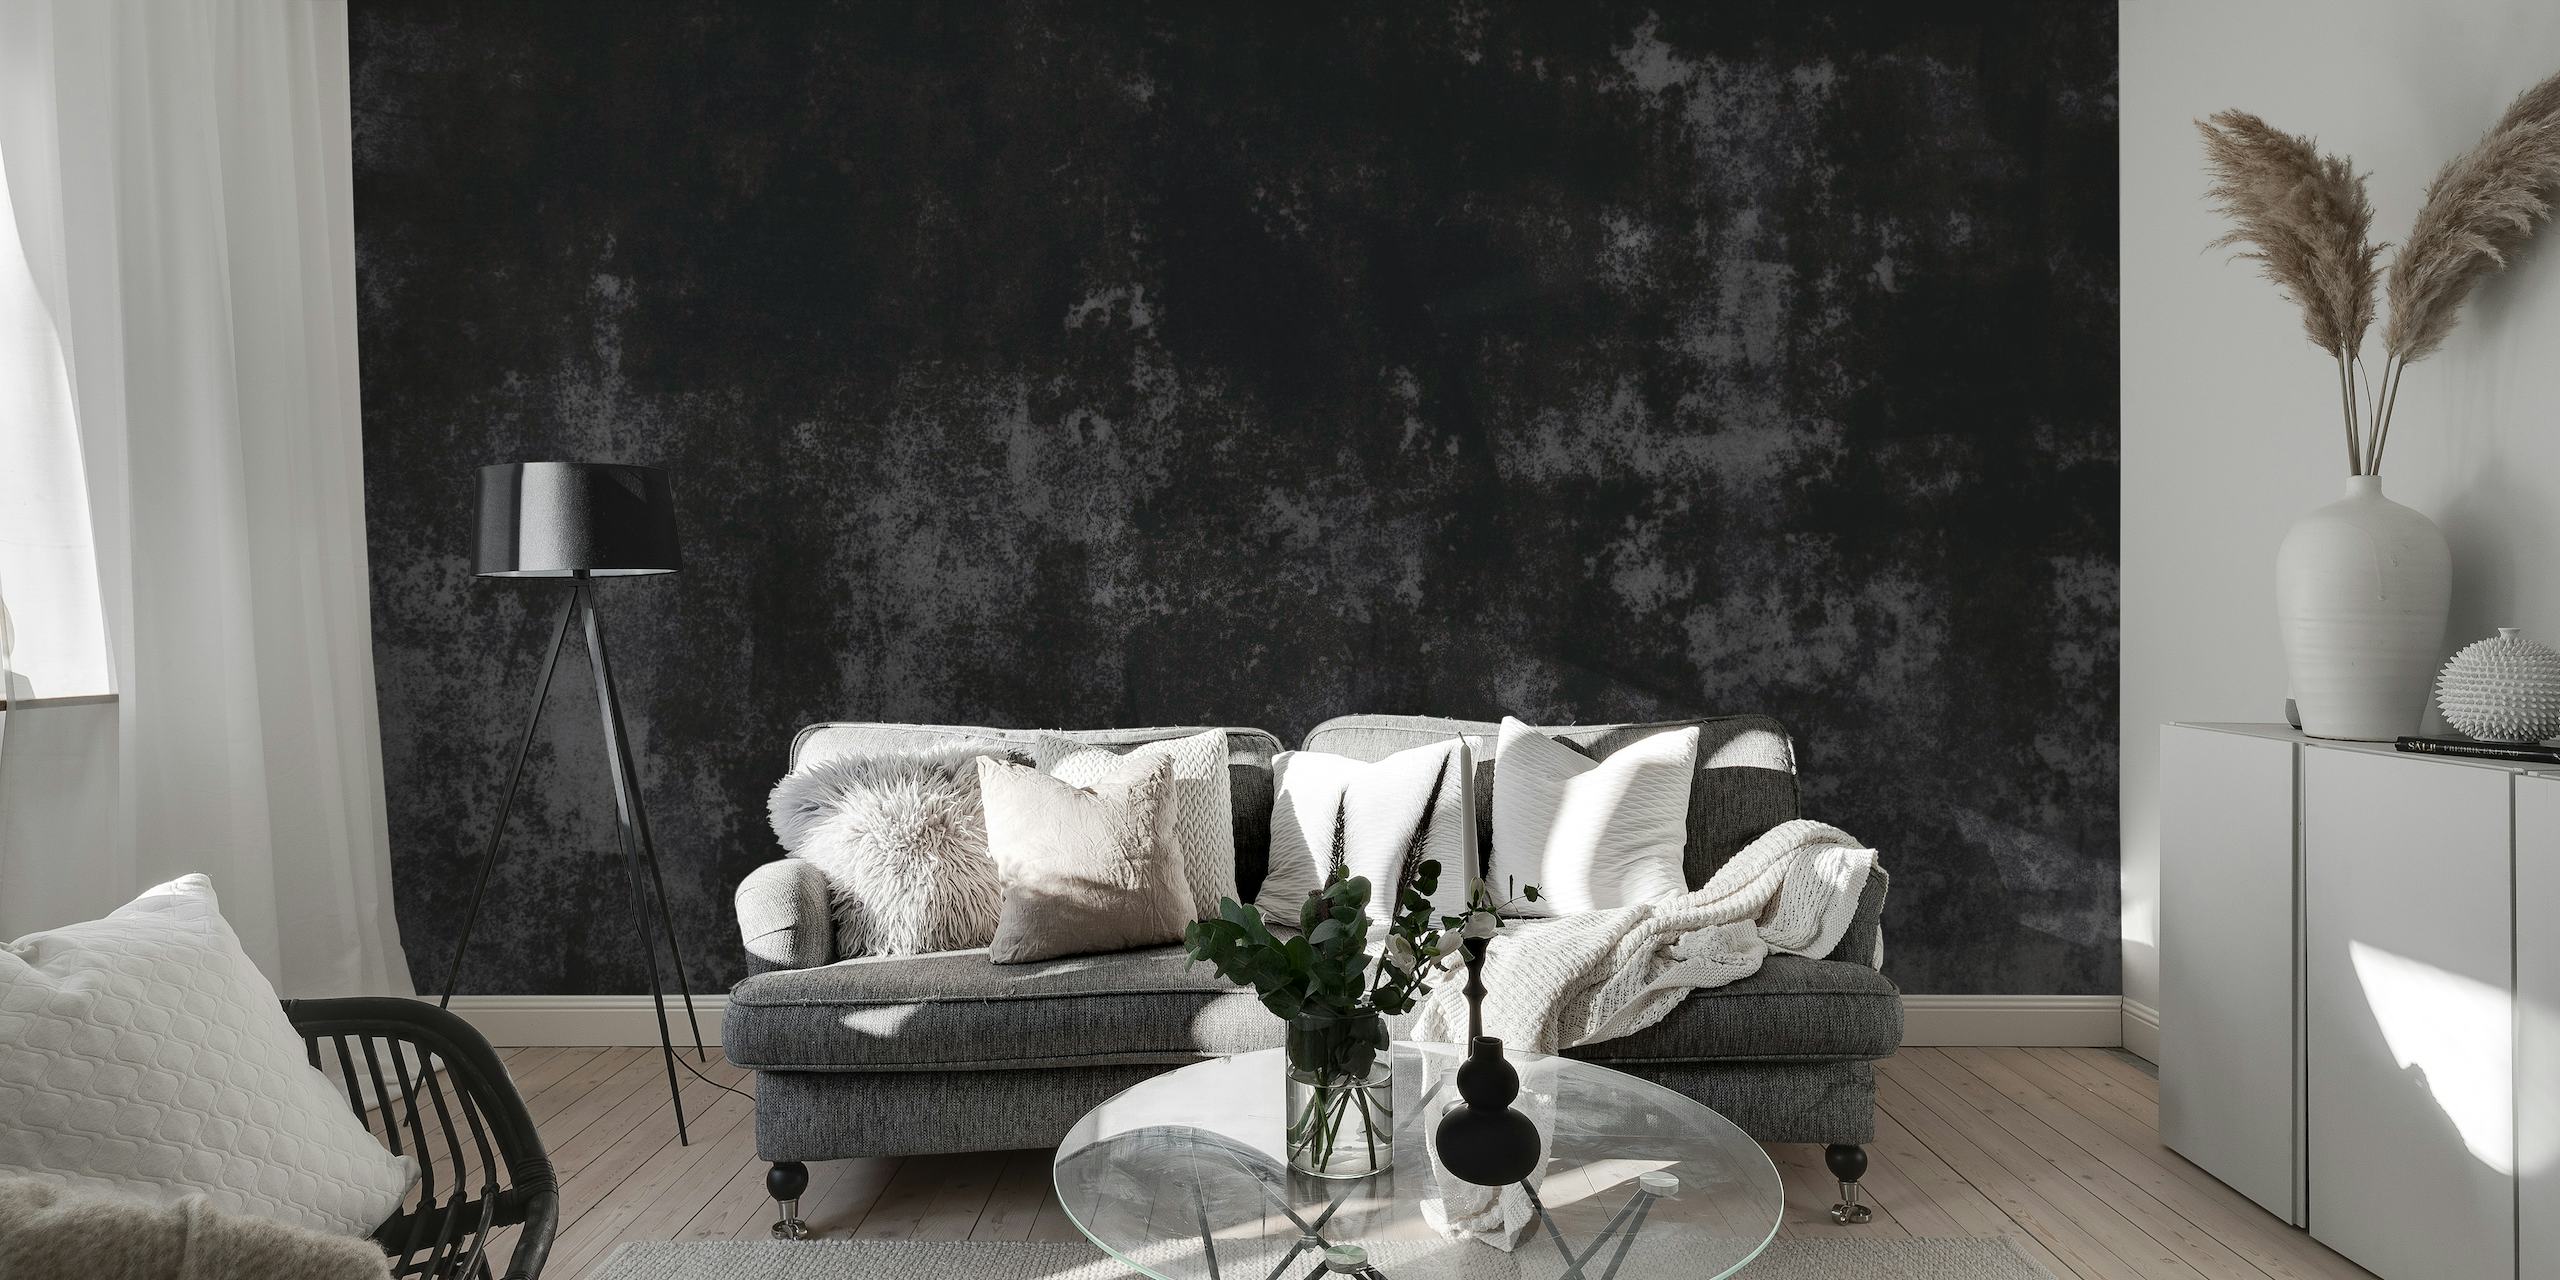 Velvet-like textured concrete wall mural in shades of gray